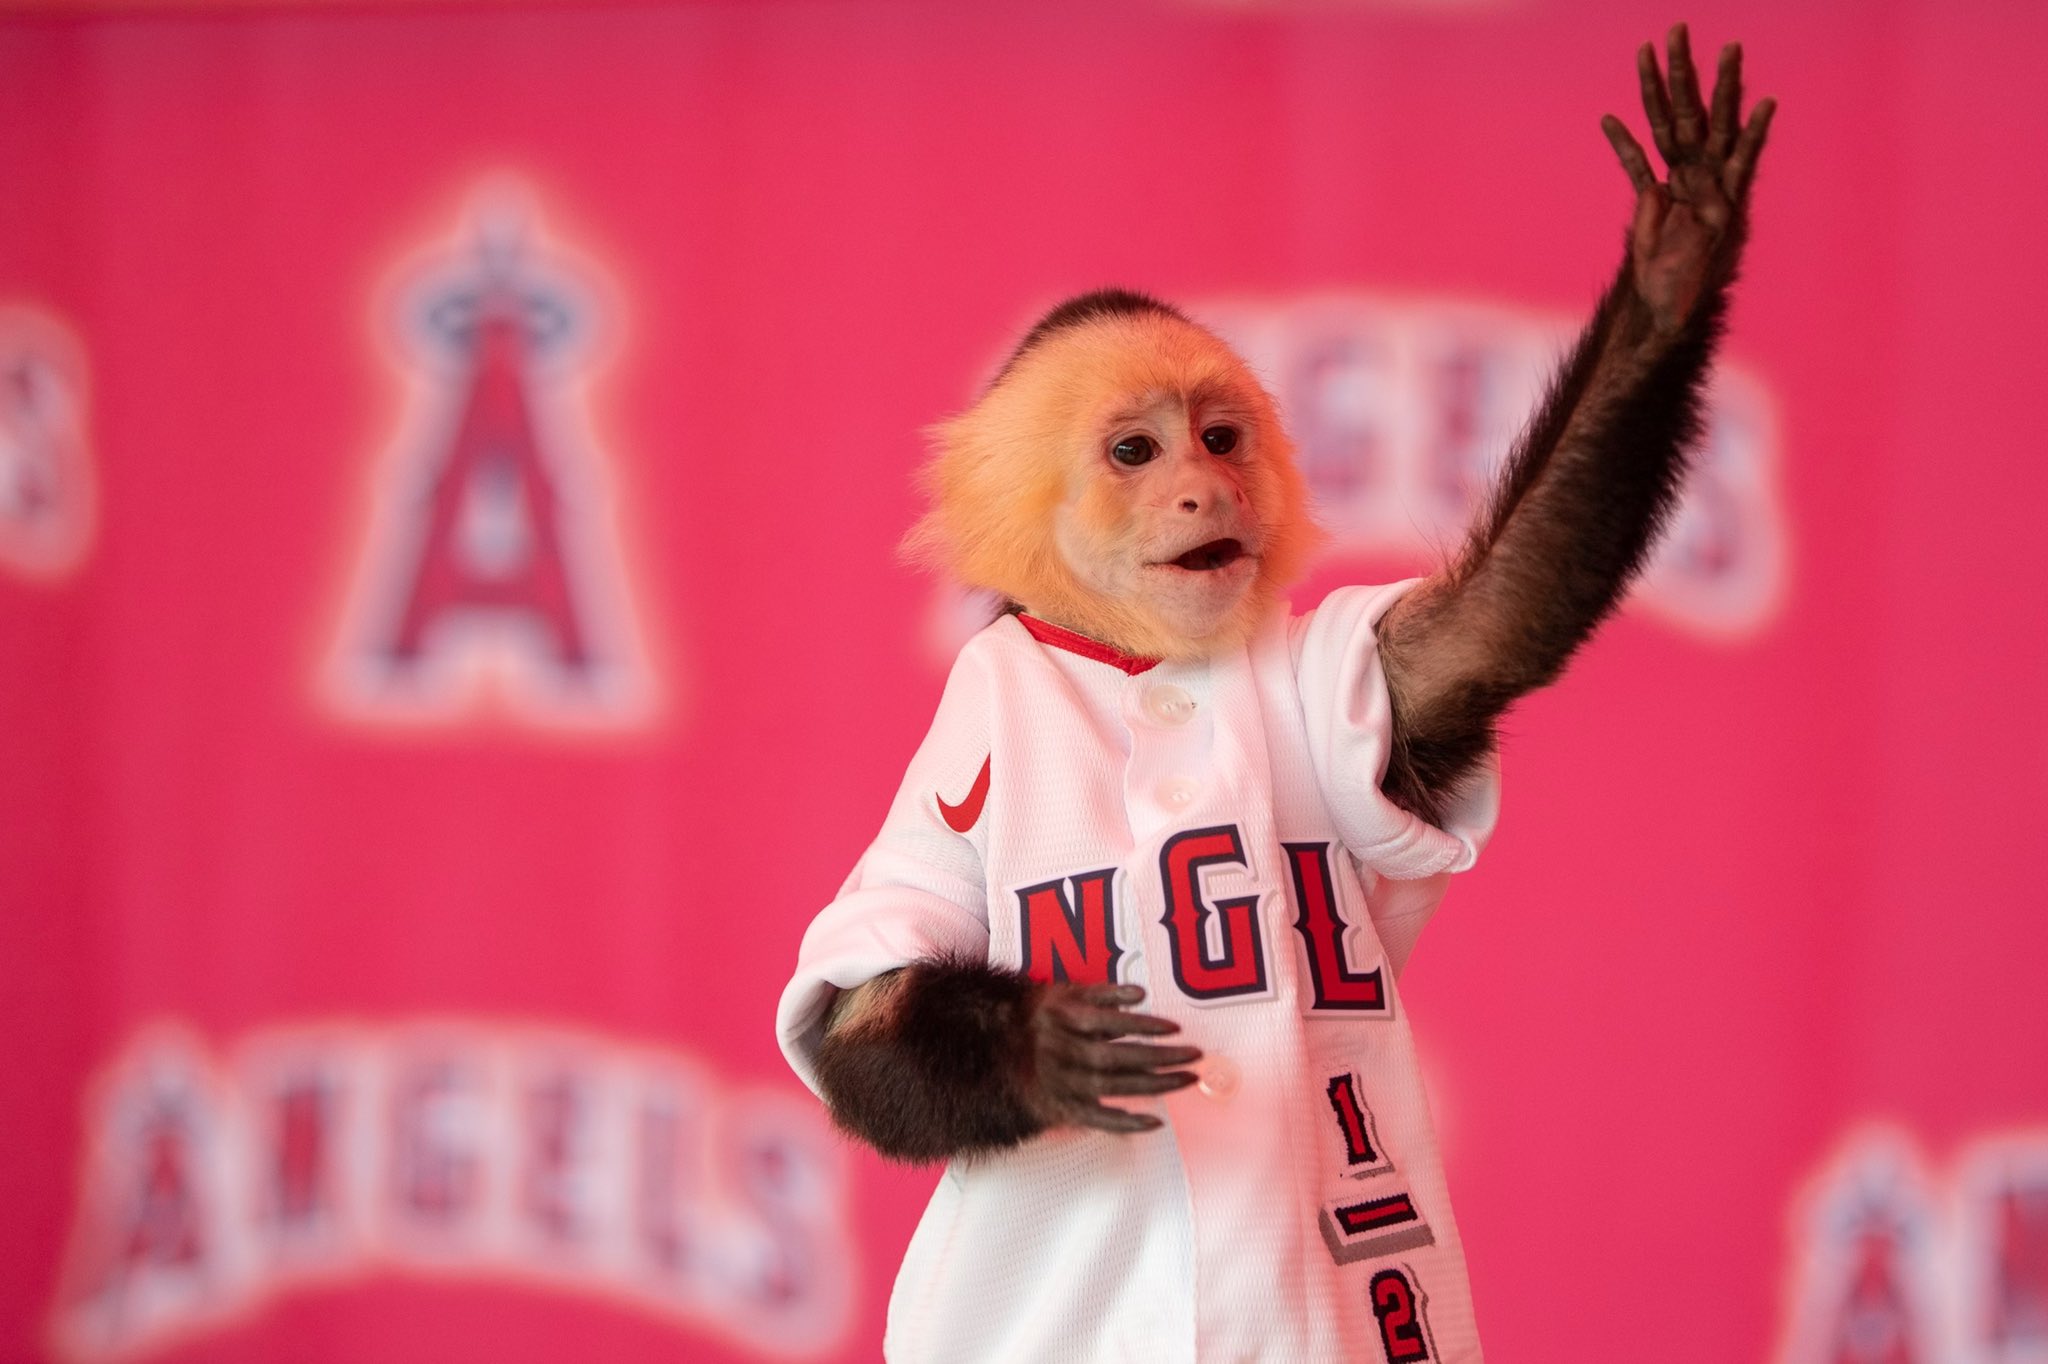 Los Angeles Angels on Twitter: "THE RALLY MONKEY IS HERE ...